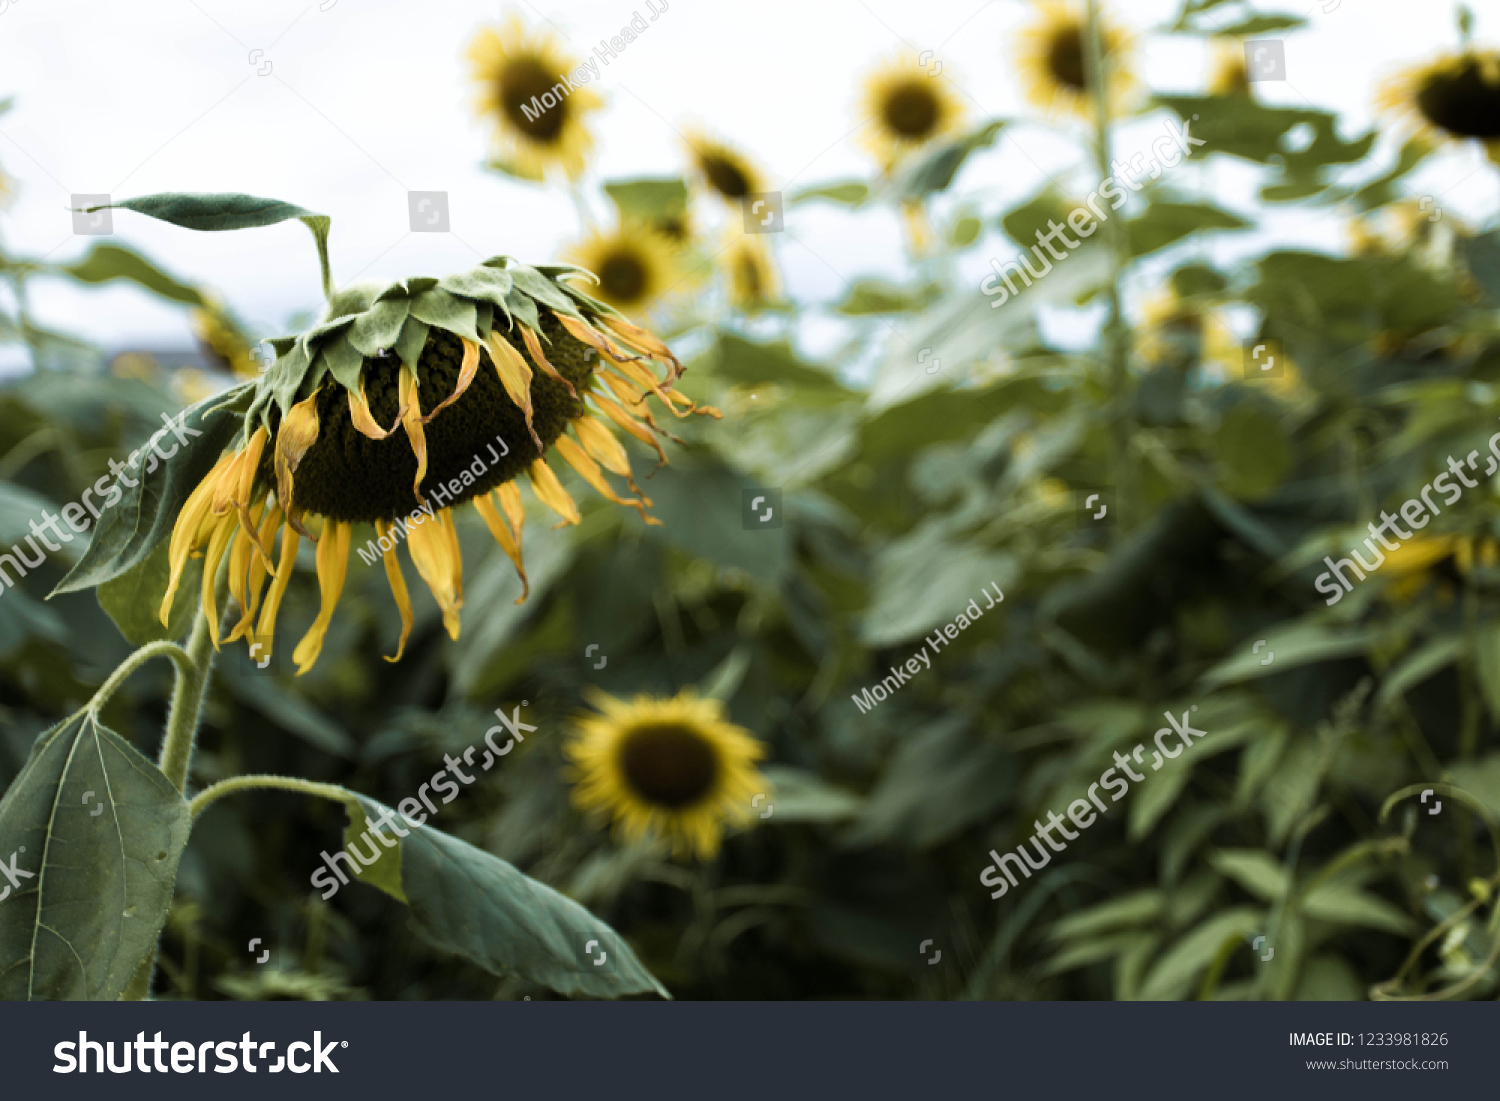 🔥 Free download Withered Sunflower Drying Color Gloom Background Stock ...